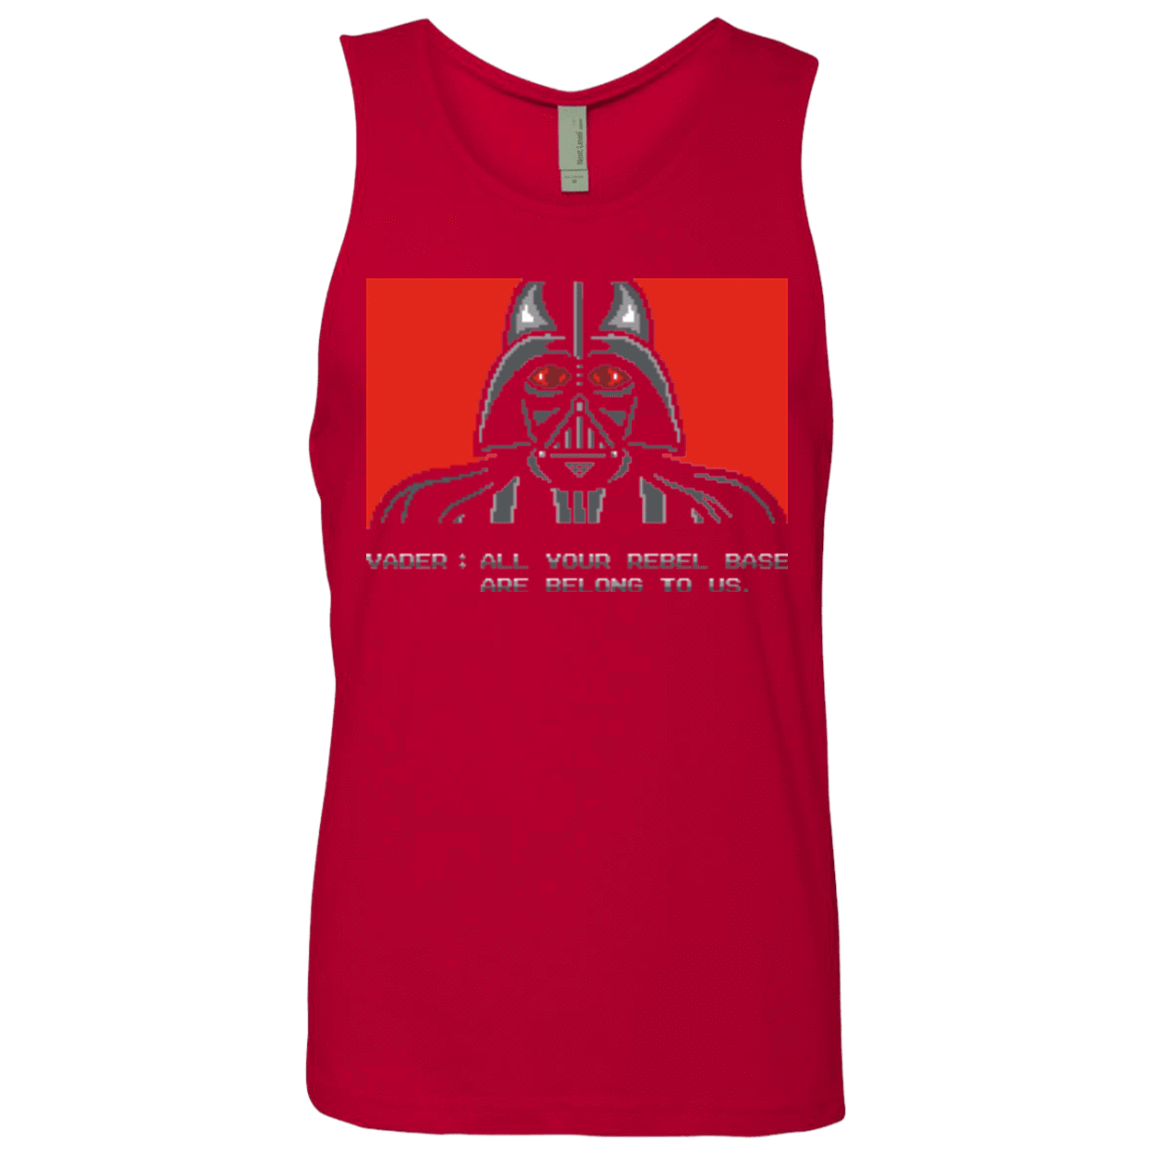 T-Shirts All your rebel base are belongs to us Men's Premium Tank Top